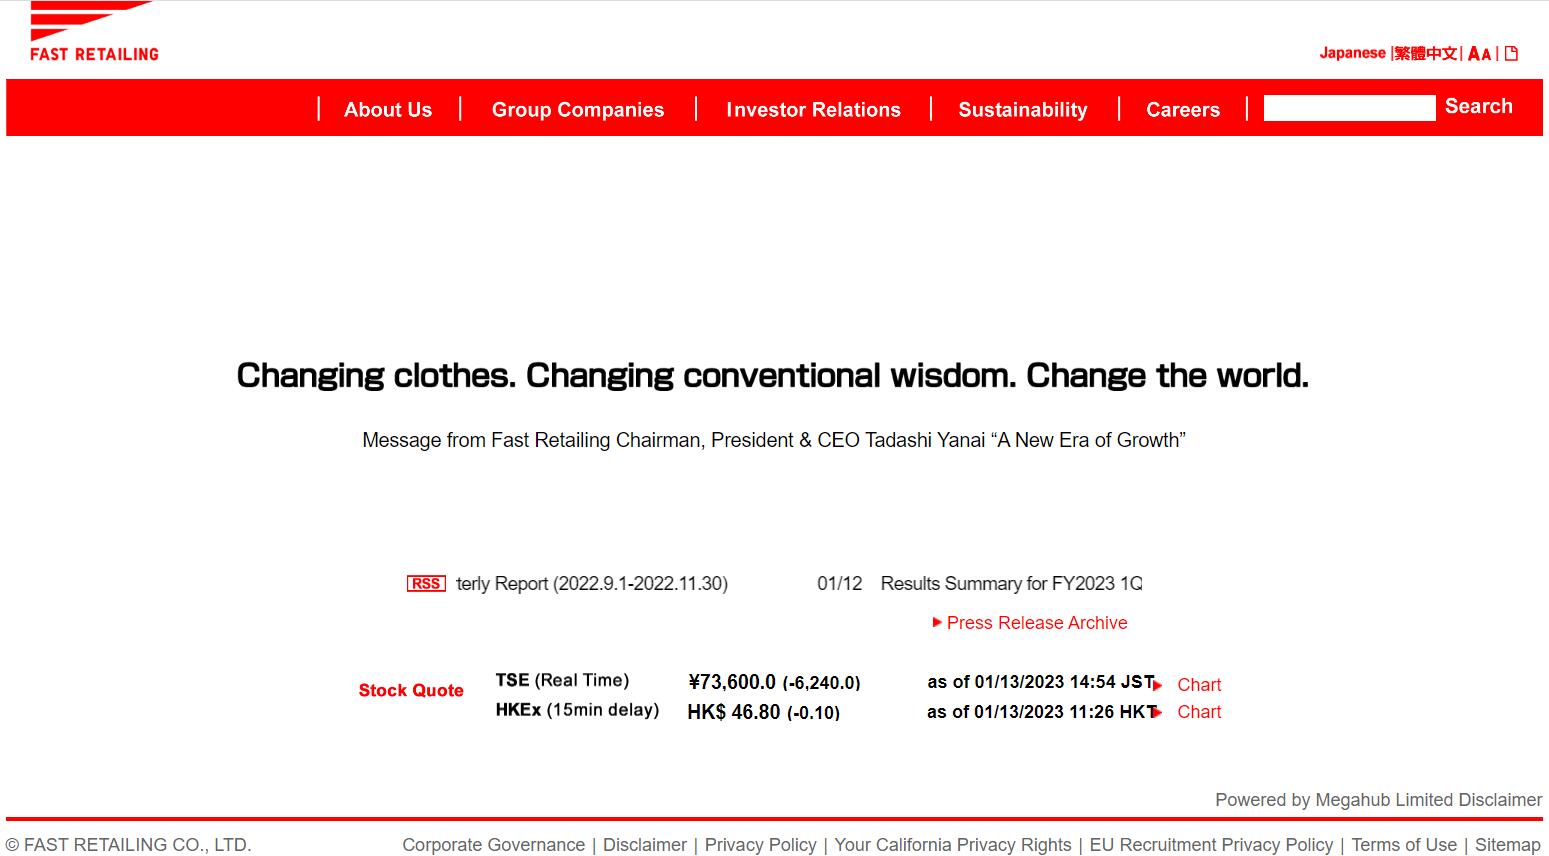 Uniqlo Parent Fast Retailing’s Profit Slid by 2%, As Japan and China Drag Growth 